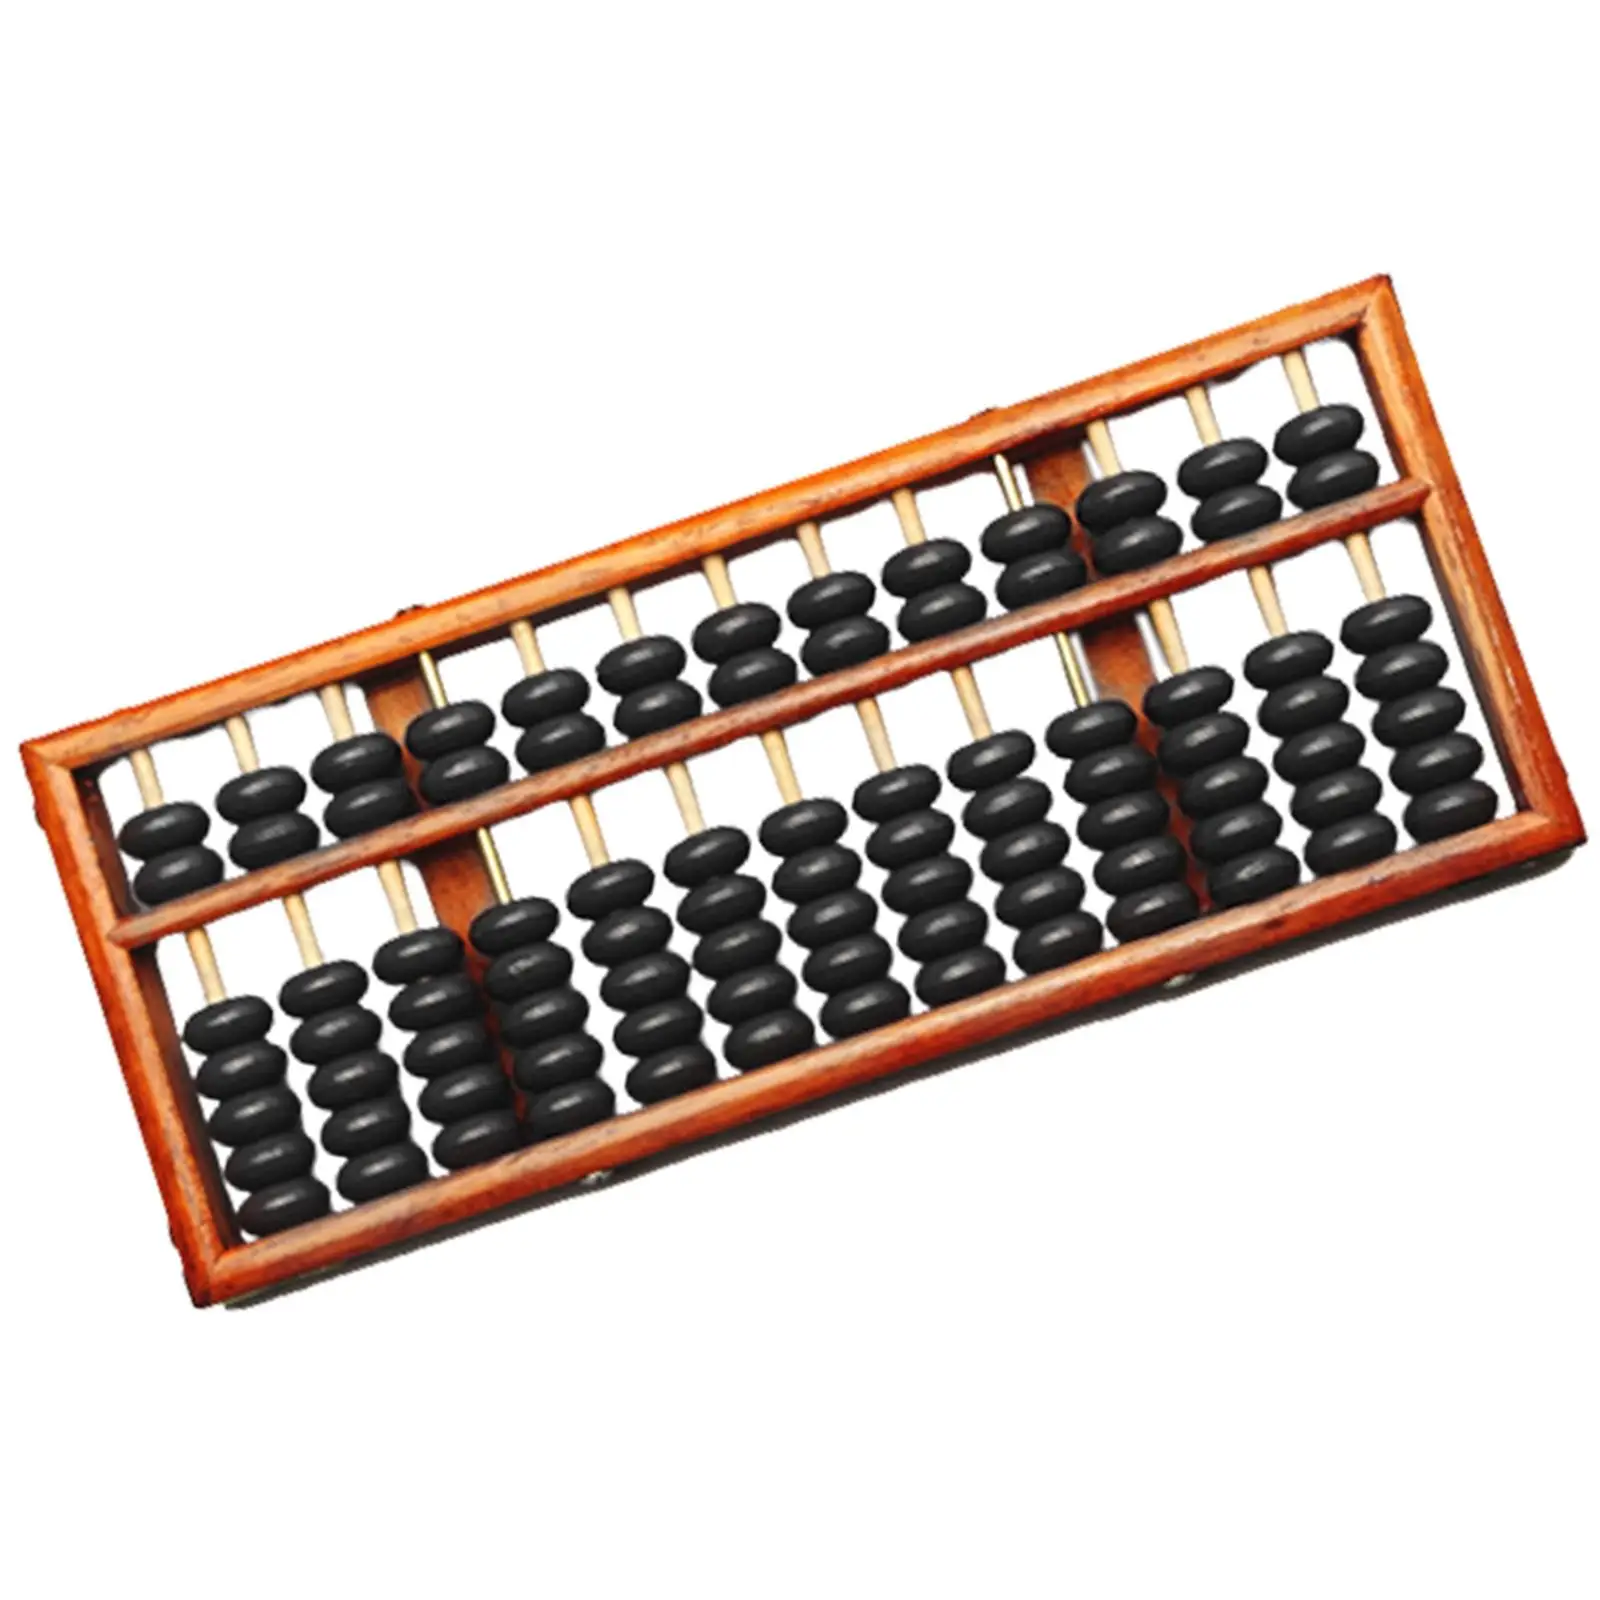 13 digits Rods Chinese Wood Bead Arithmetic Abacus Counting Tool Ornament